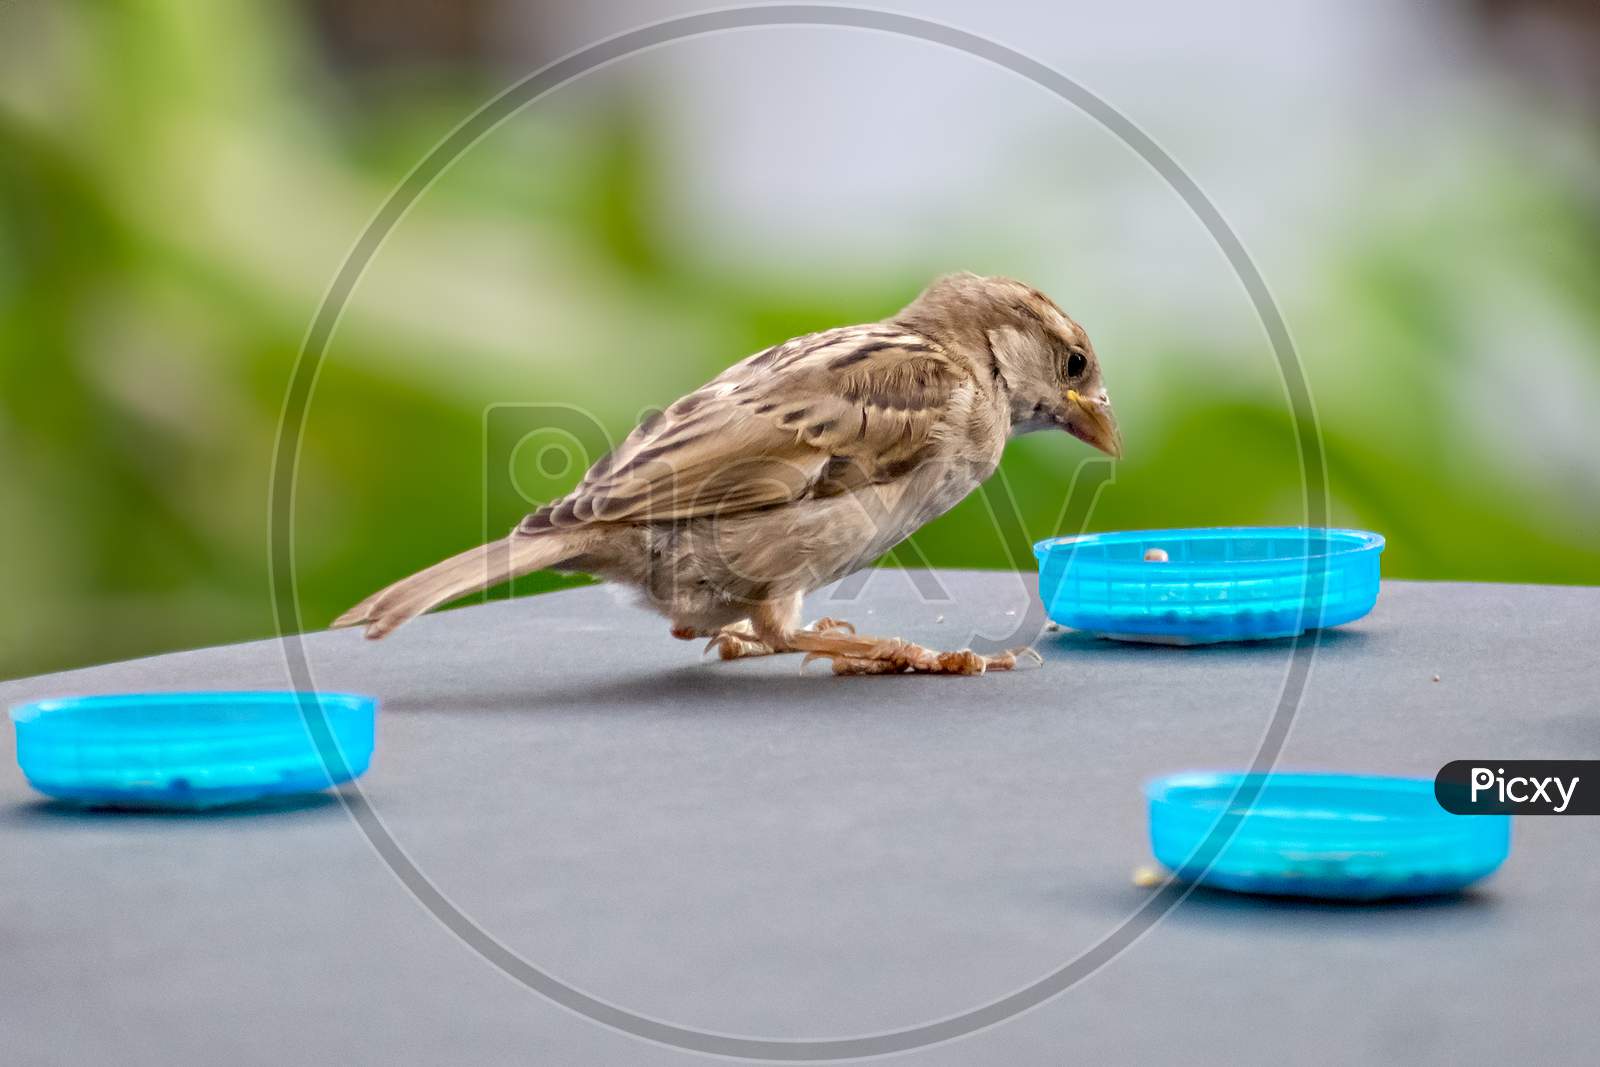 Isolated Image Of Female Sparrow On Wall Eating Food With Clear Green Background.